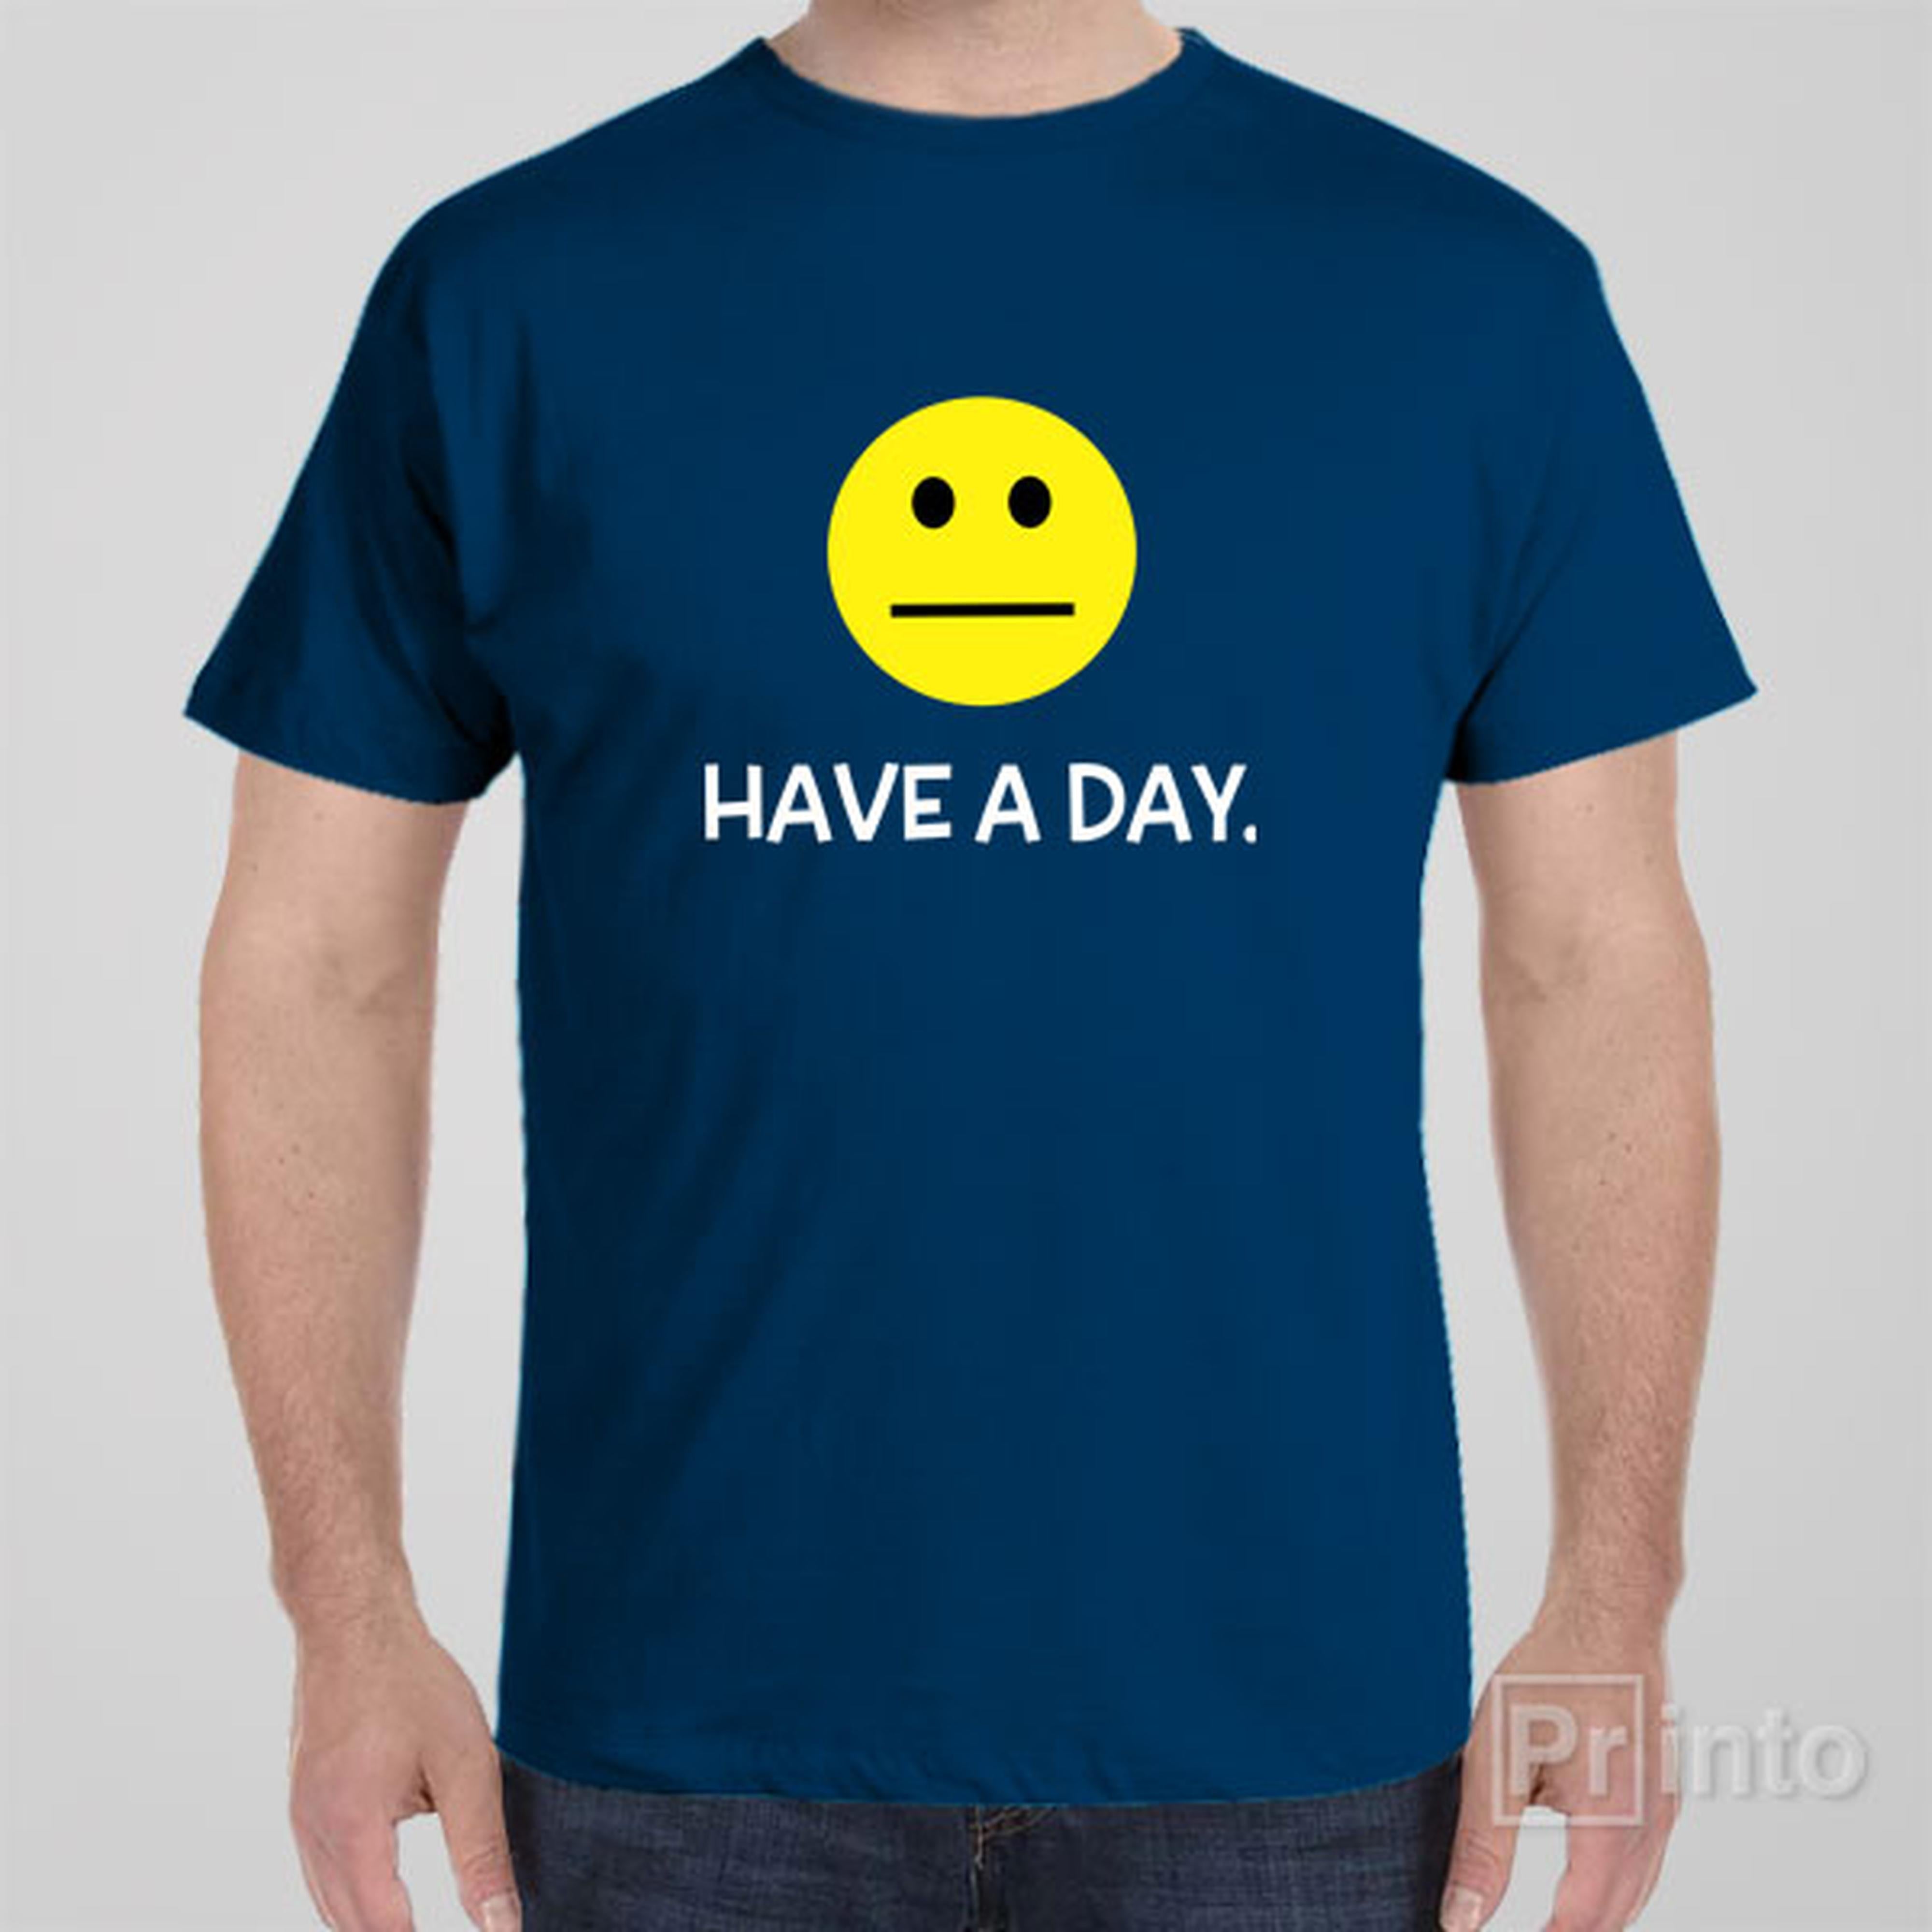 have-a-day-t-shirt